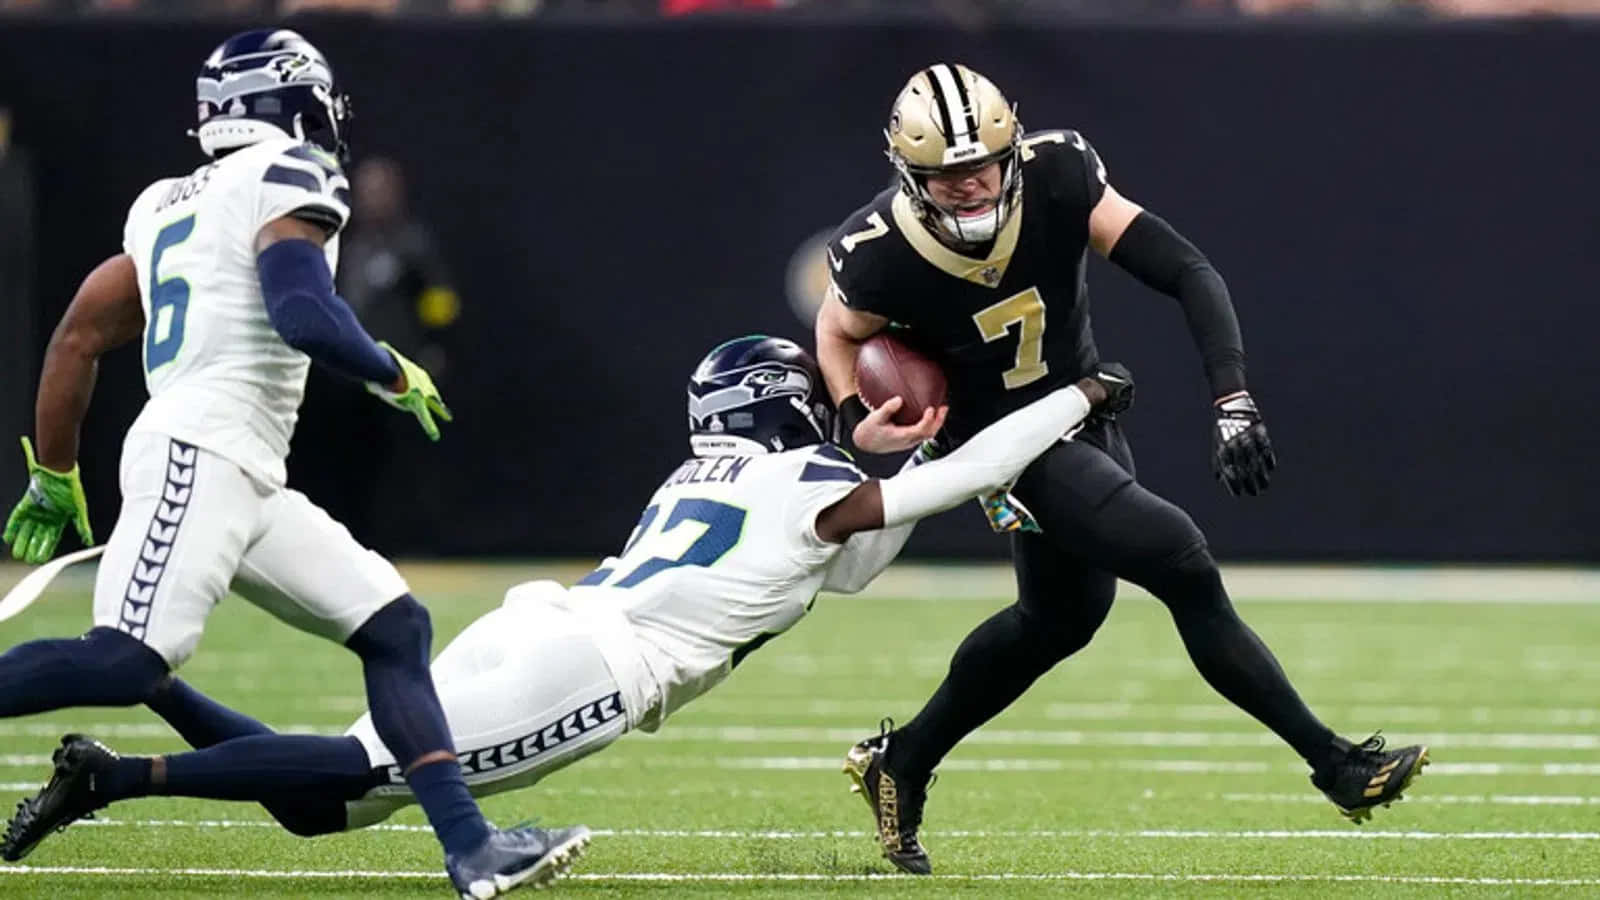 Taysom Hill Evading Tackle During Game Wallpaper